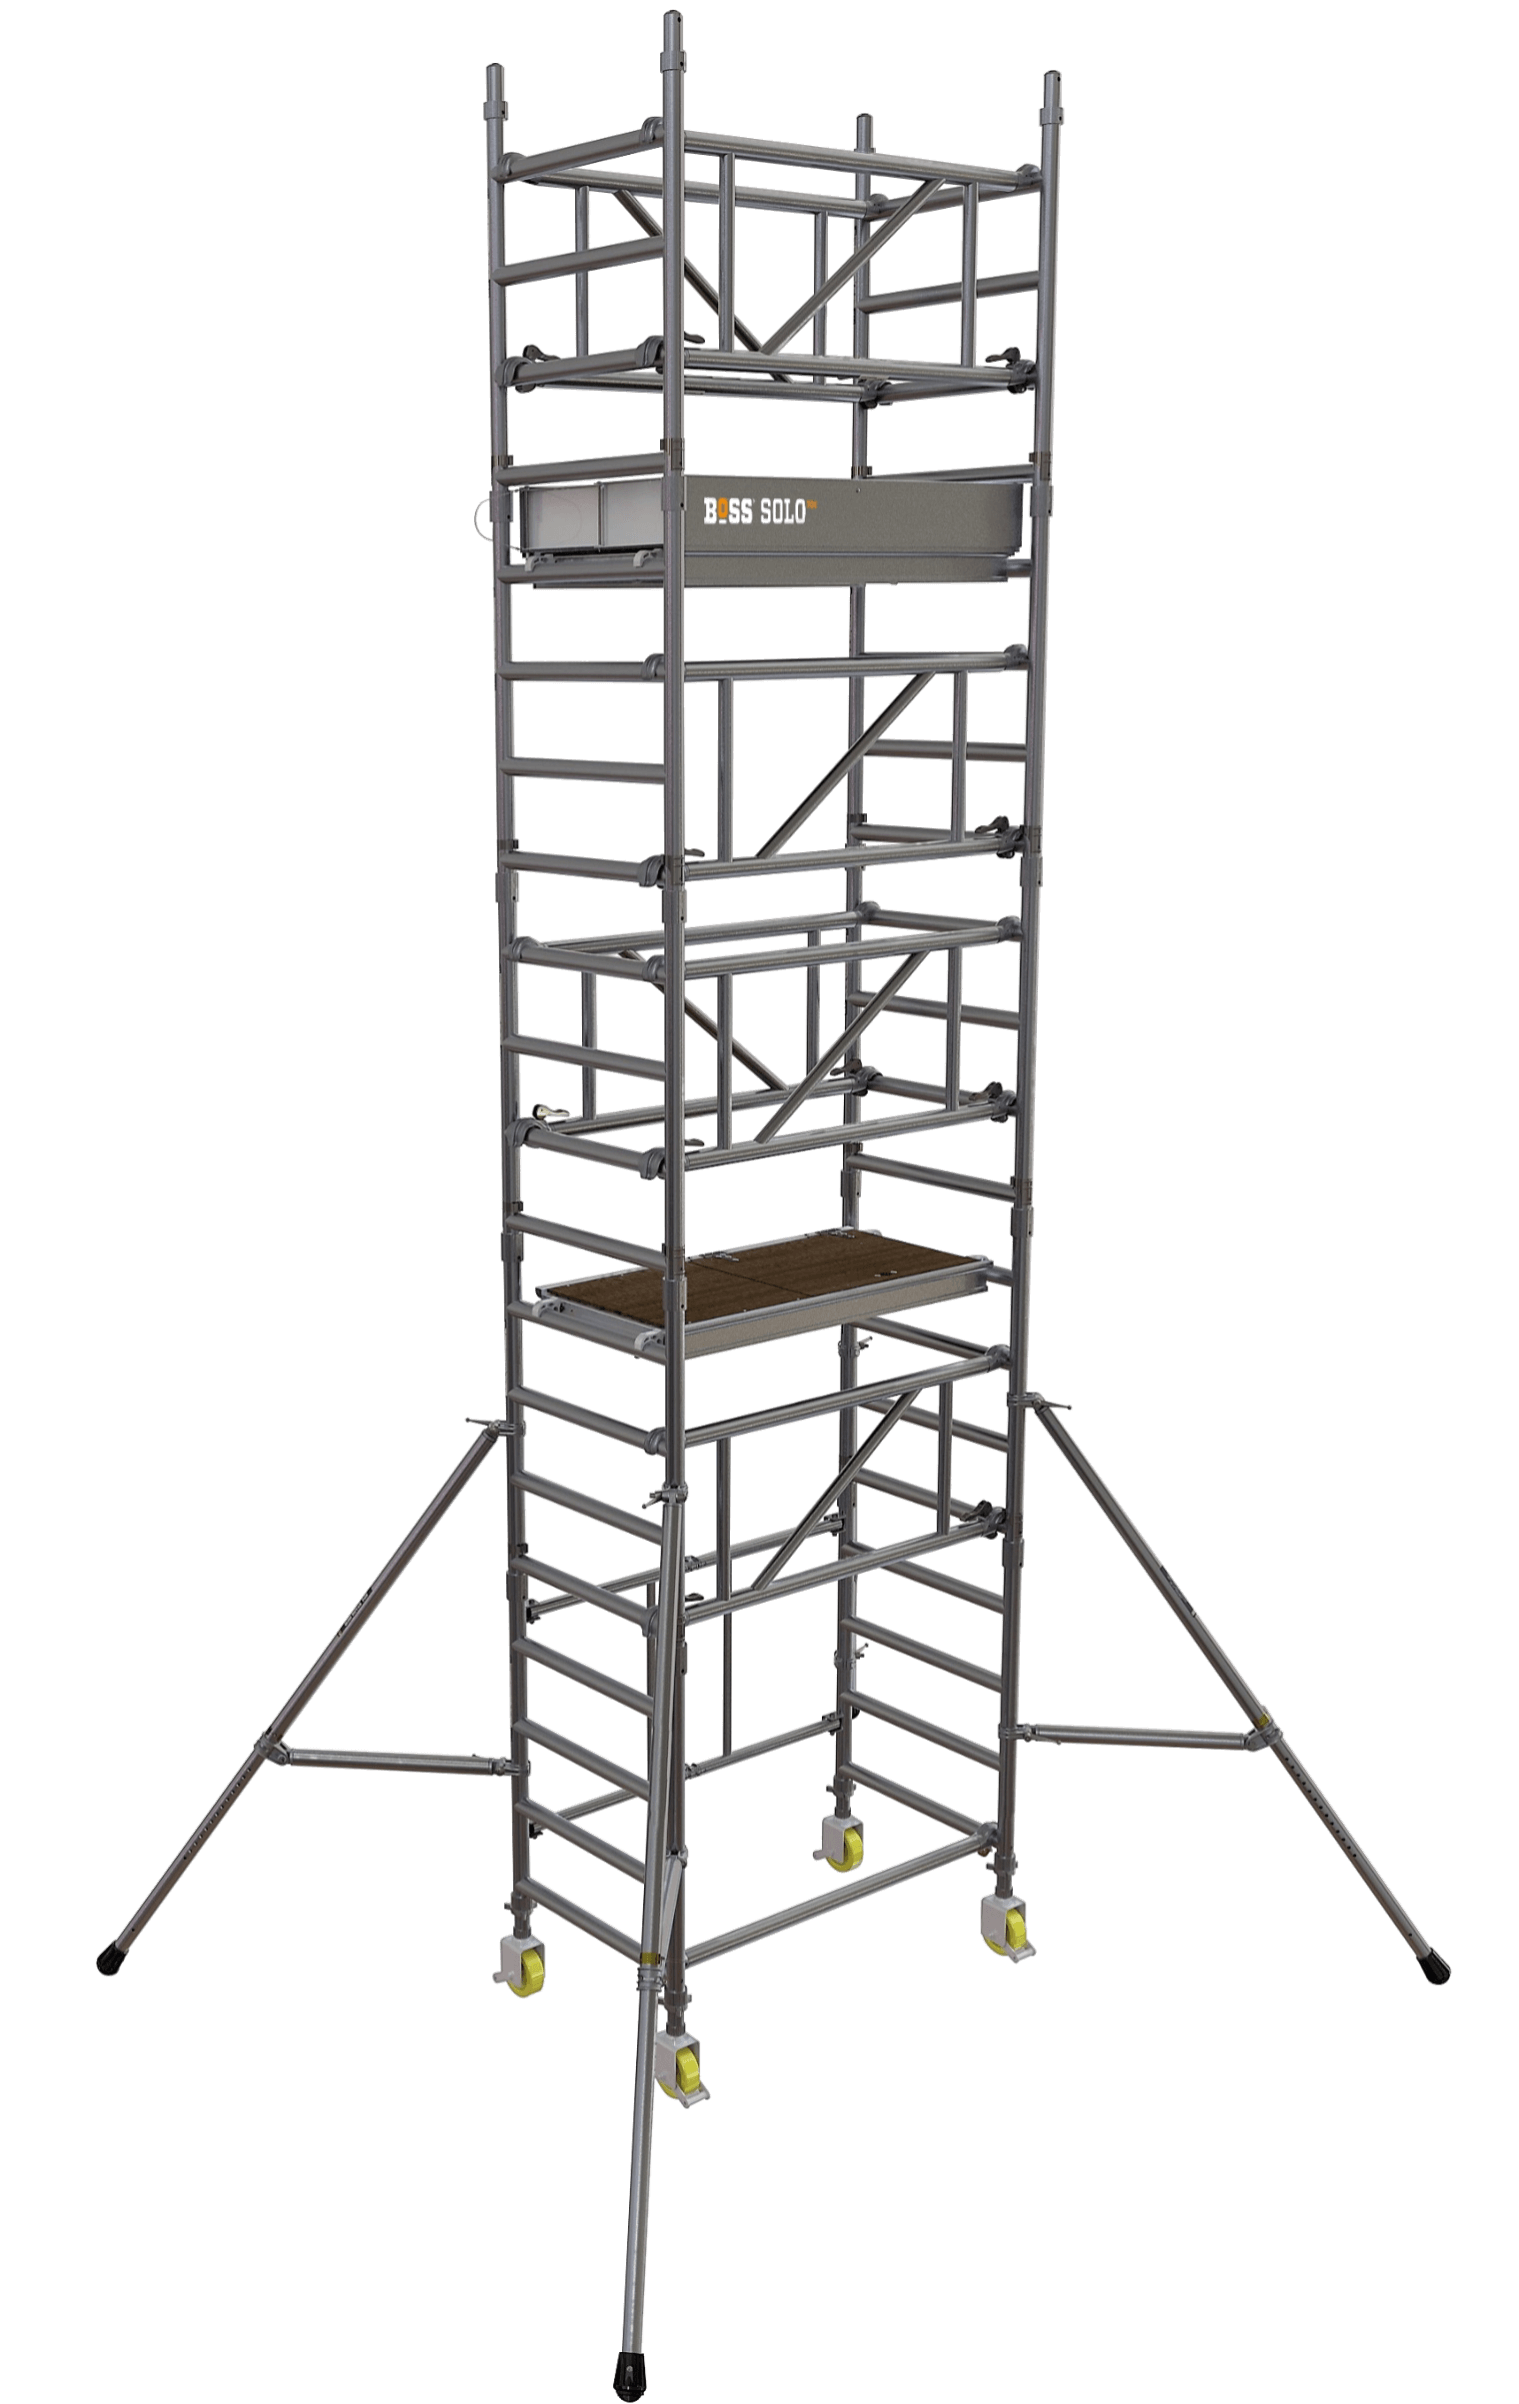 BoSS SOLO 700 Access Tower - rapid build single person tower